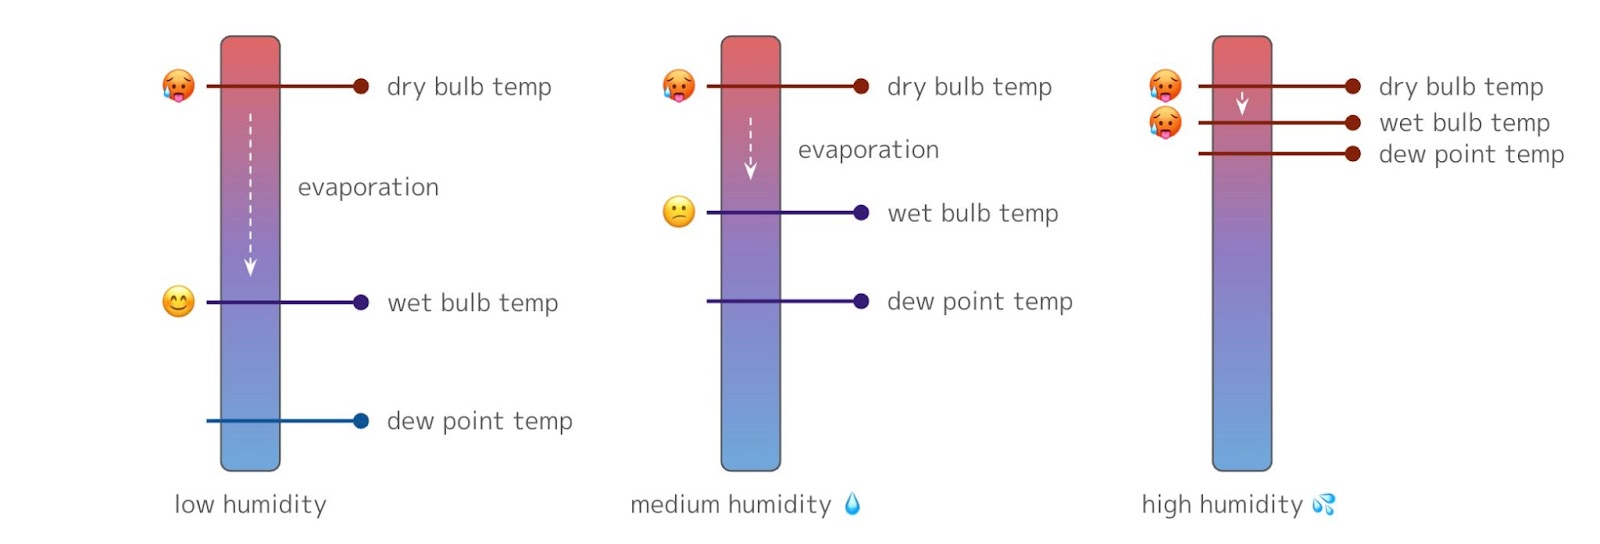 three thermometers showing where dry bulb temp, wet bulb temp, and dew point is indicated on each depending on humidity level, with emojis demonstrating the comfort level